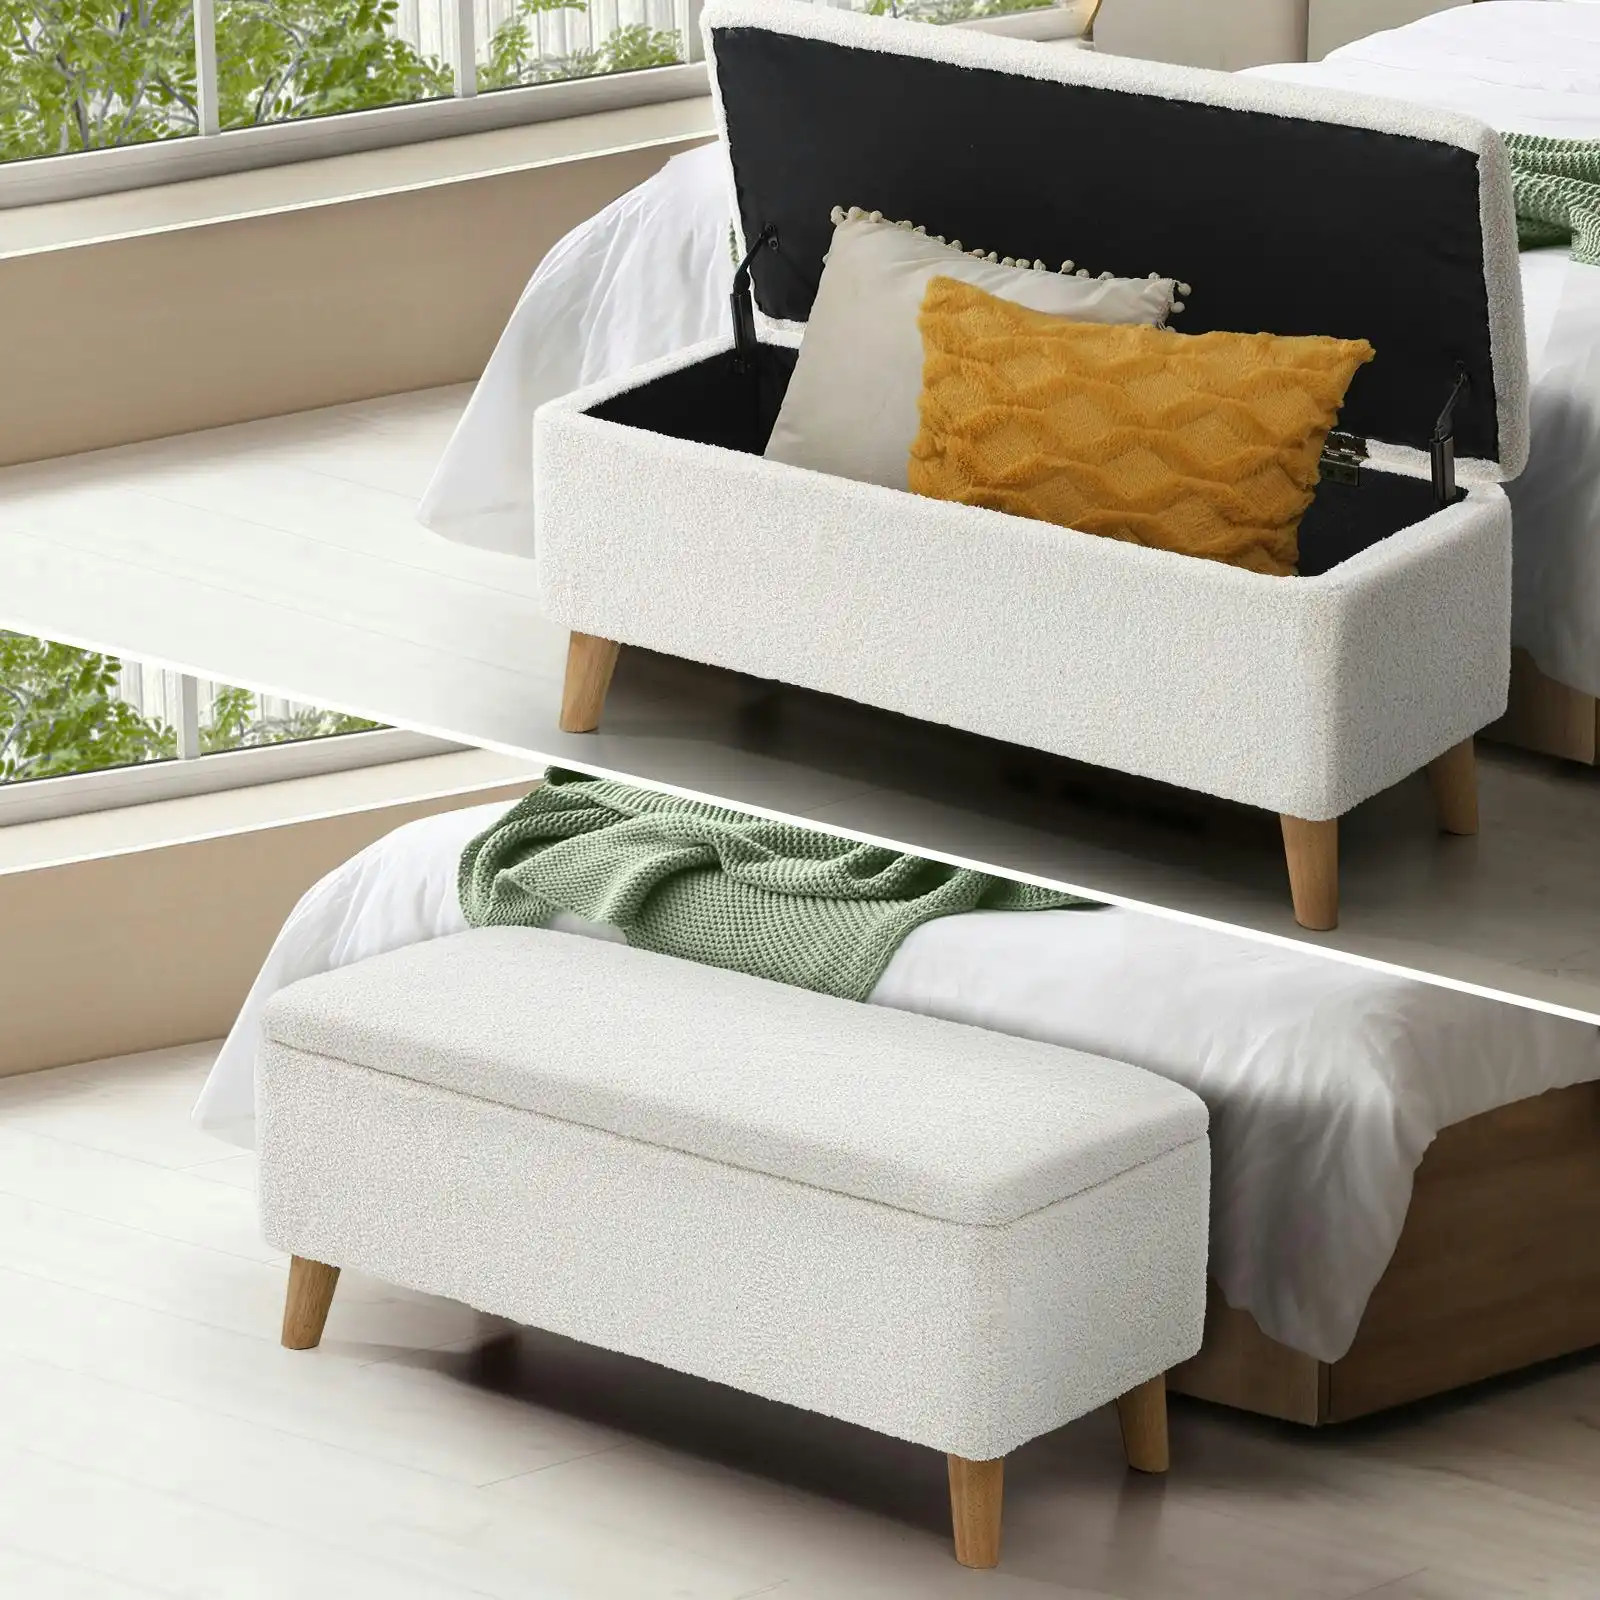 Oikiture Storage Ottoman Blanket Box Chest Toy Foot Stool LARGE Sherpa White